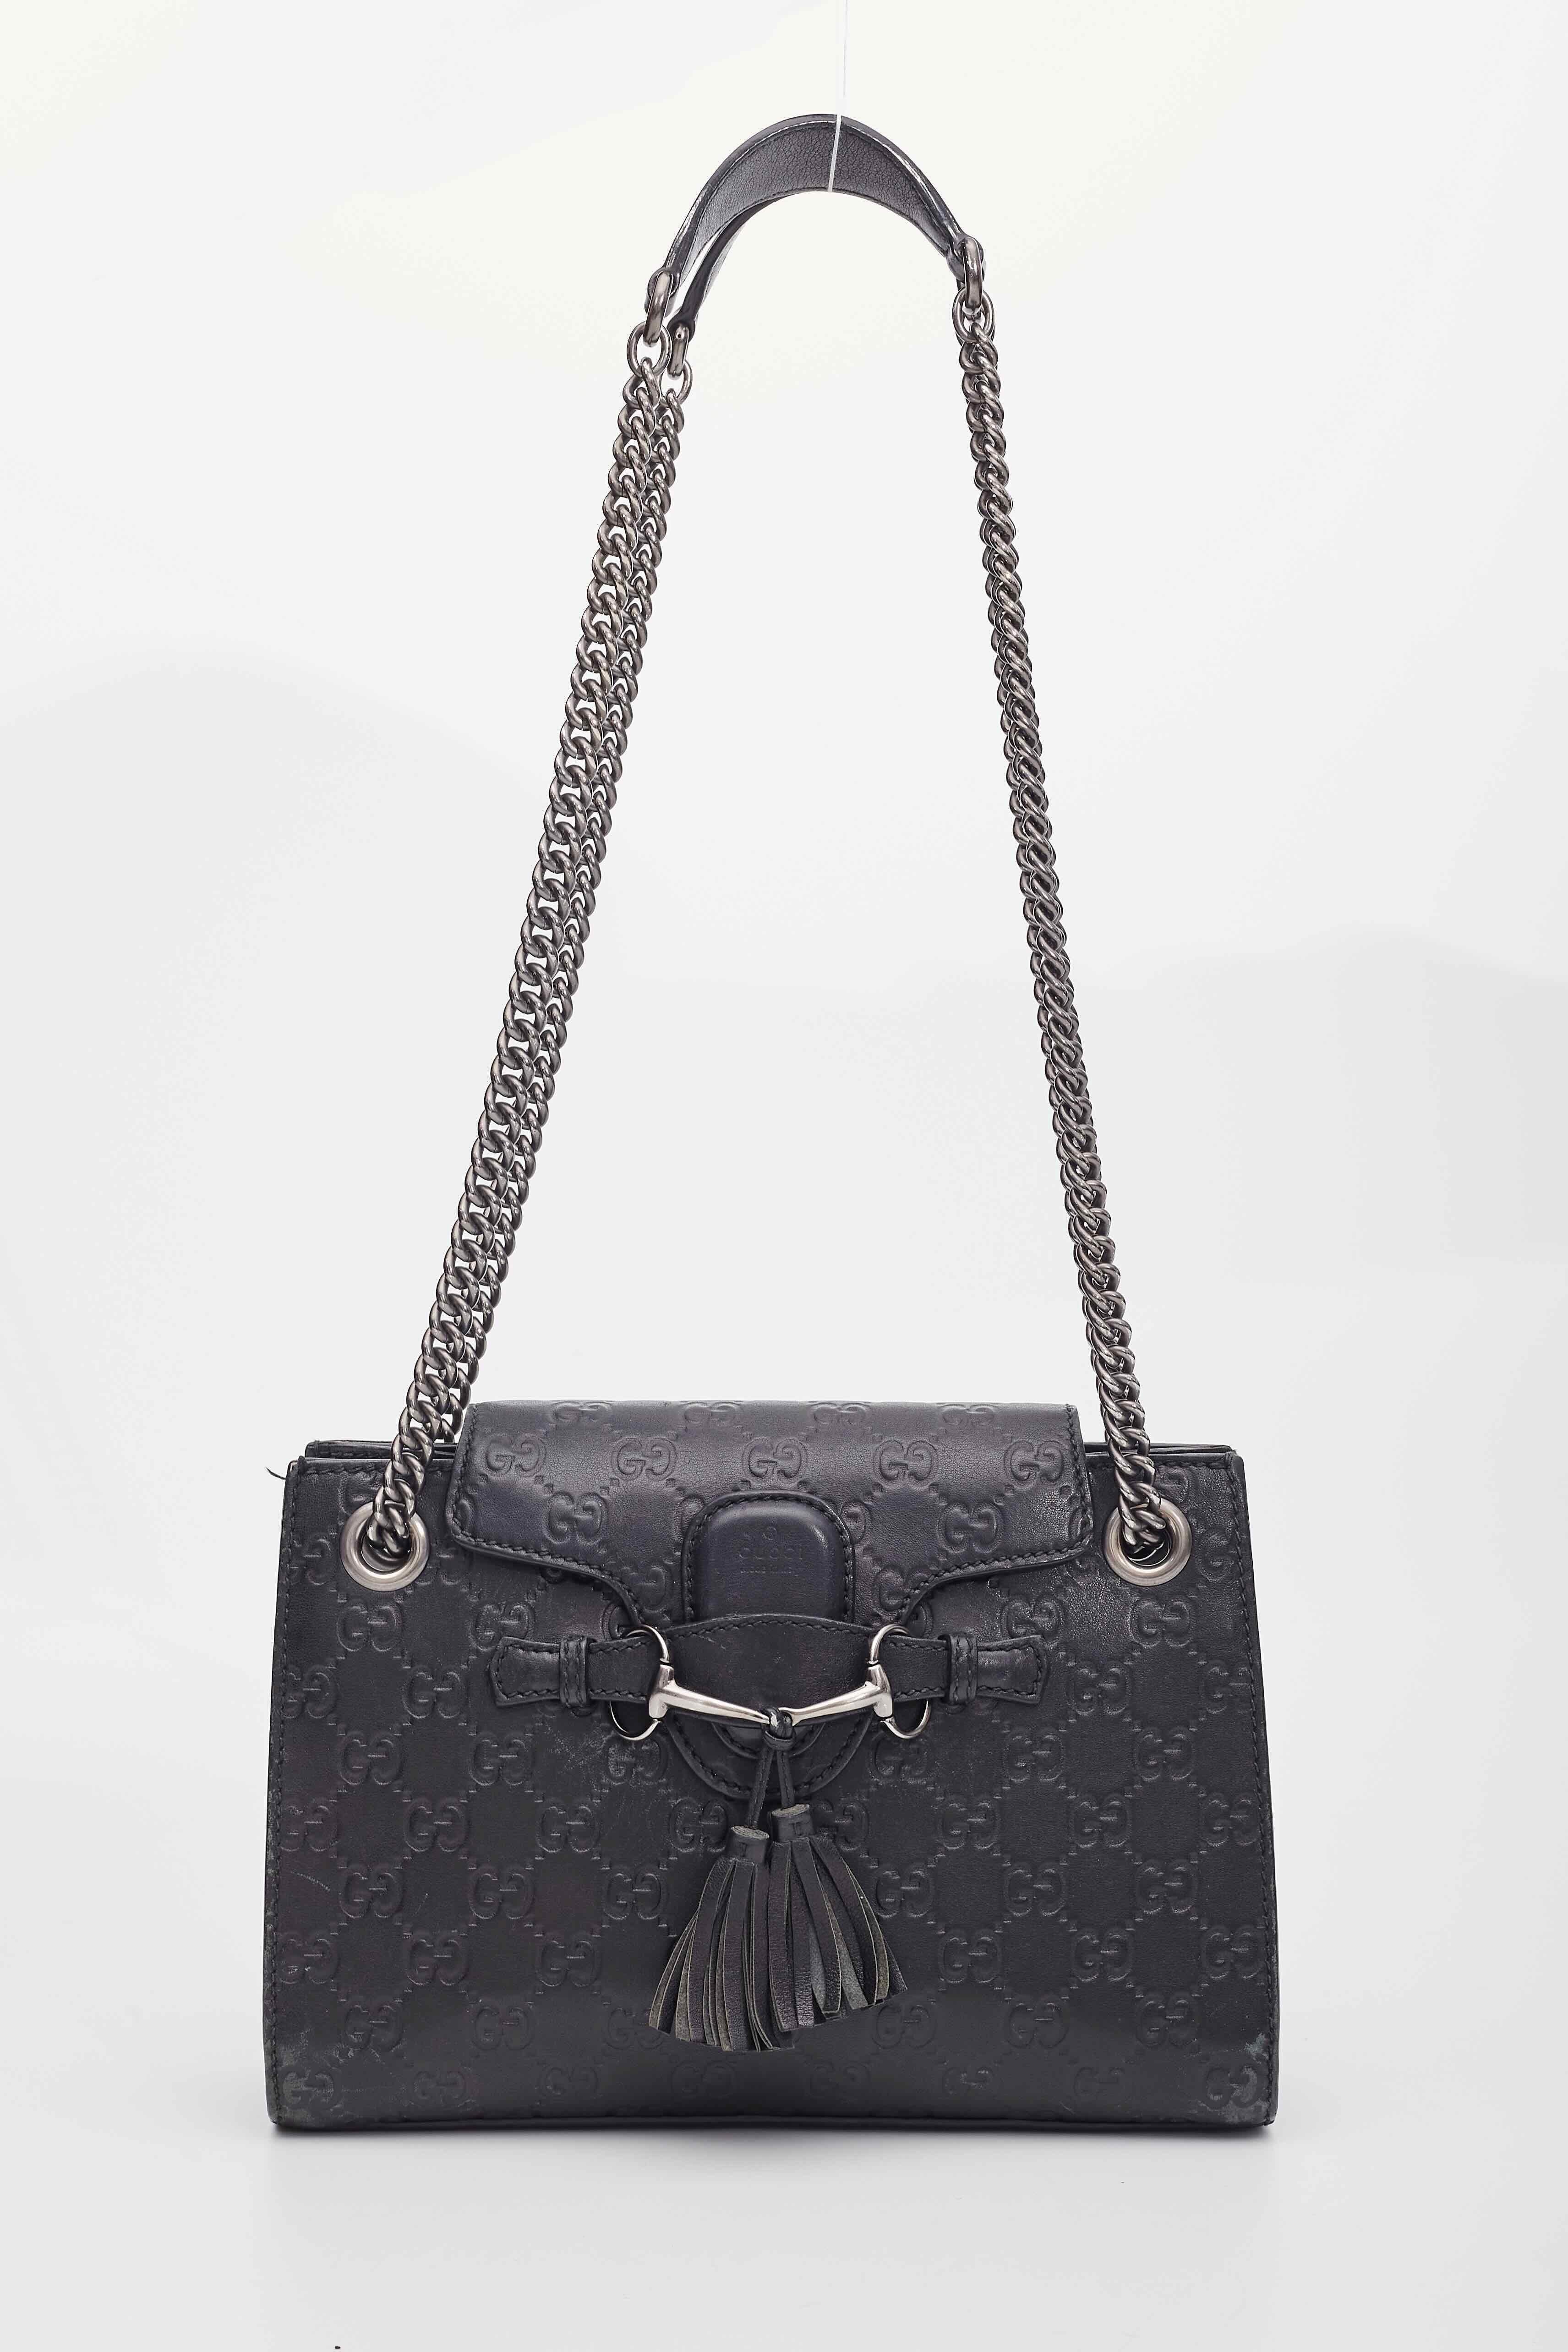 Color: Black
Material: Guccissima GG embossed leather
Item Code: 369621
Measures: H6.5” x L 9.5” x D 2.5”
Drop: 11 inch (double strap) and 22 inch (single strap)
Comes With: Dust bag, care card
Condition: Good. Faint marks and light signs of